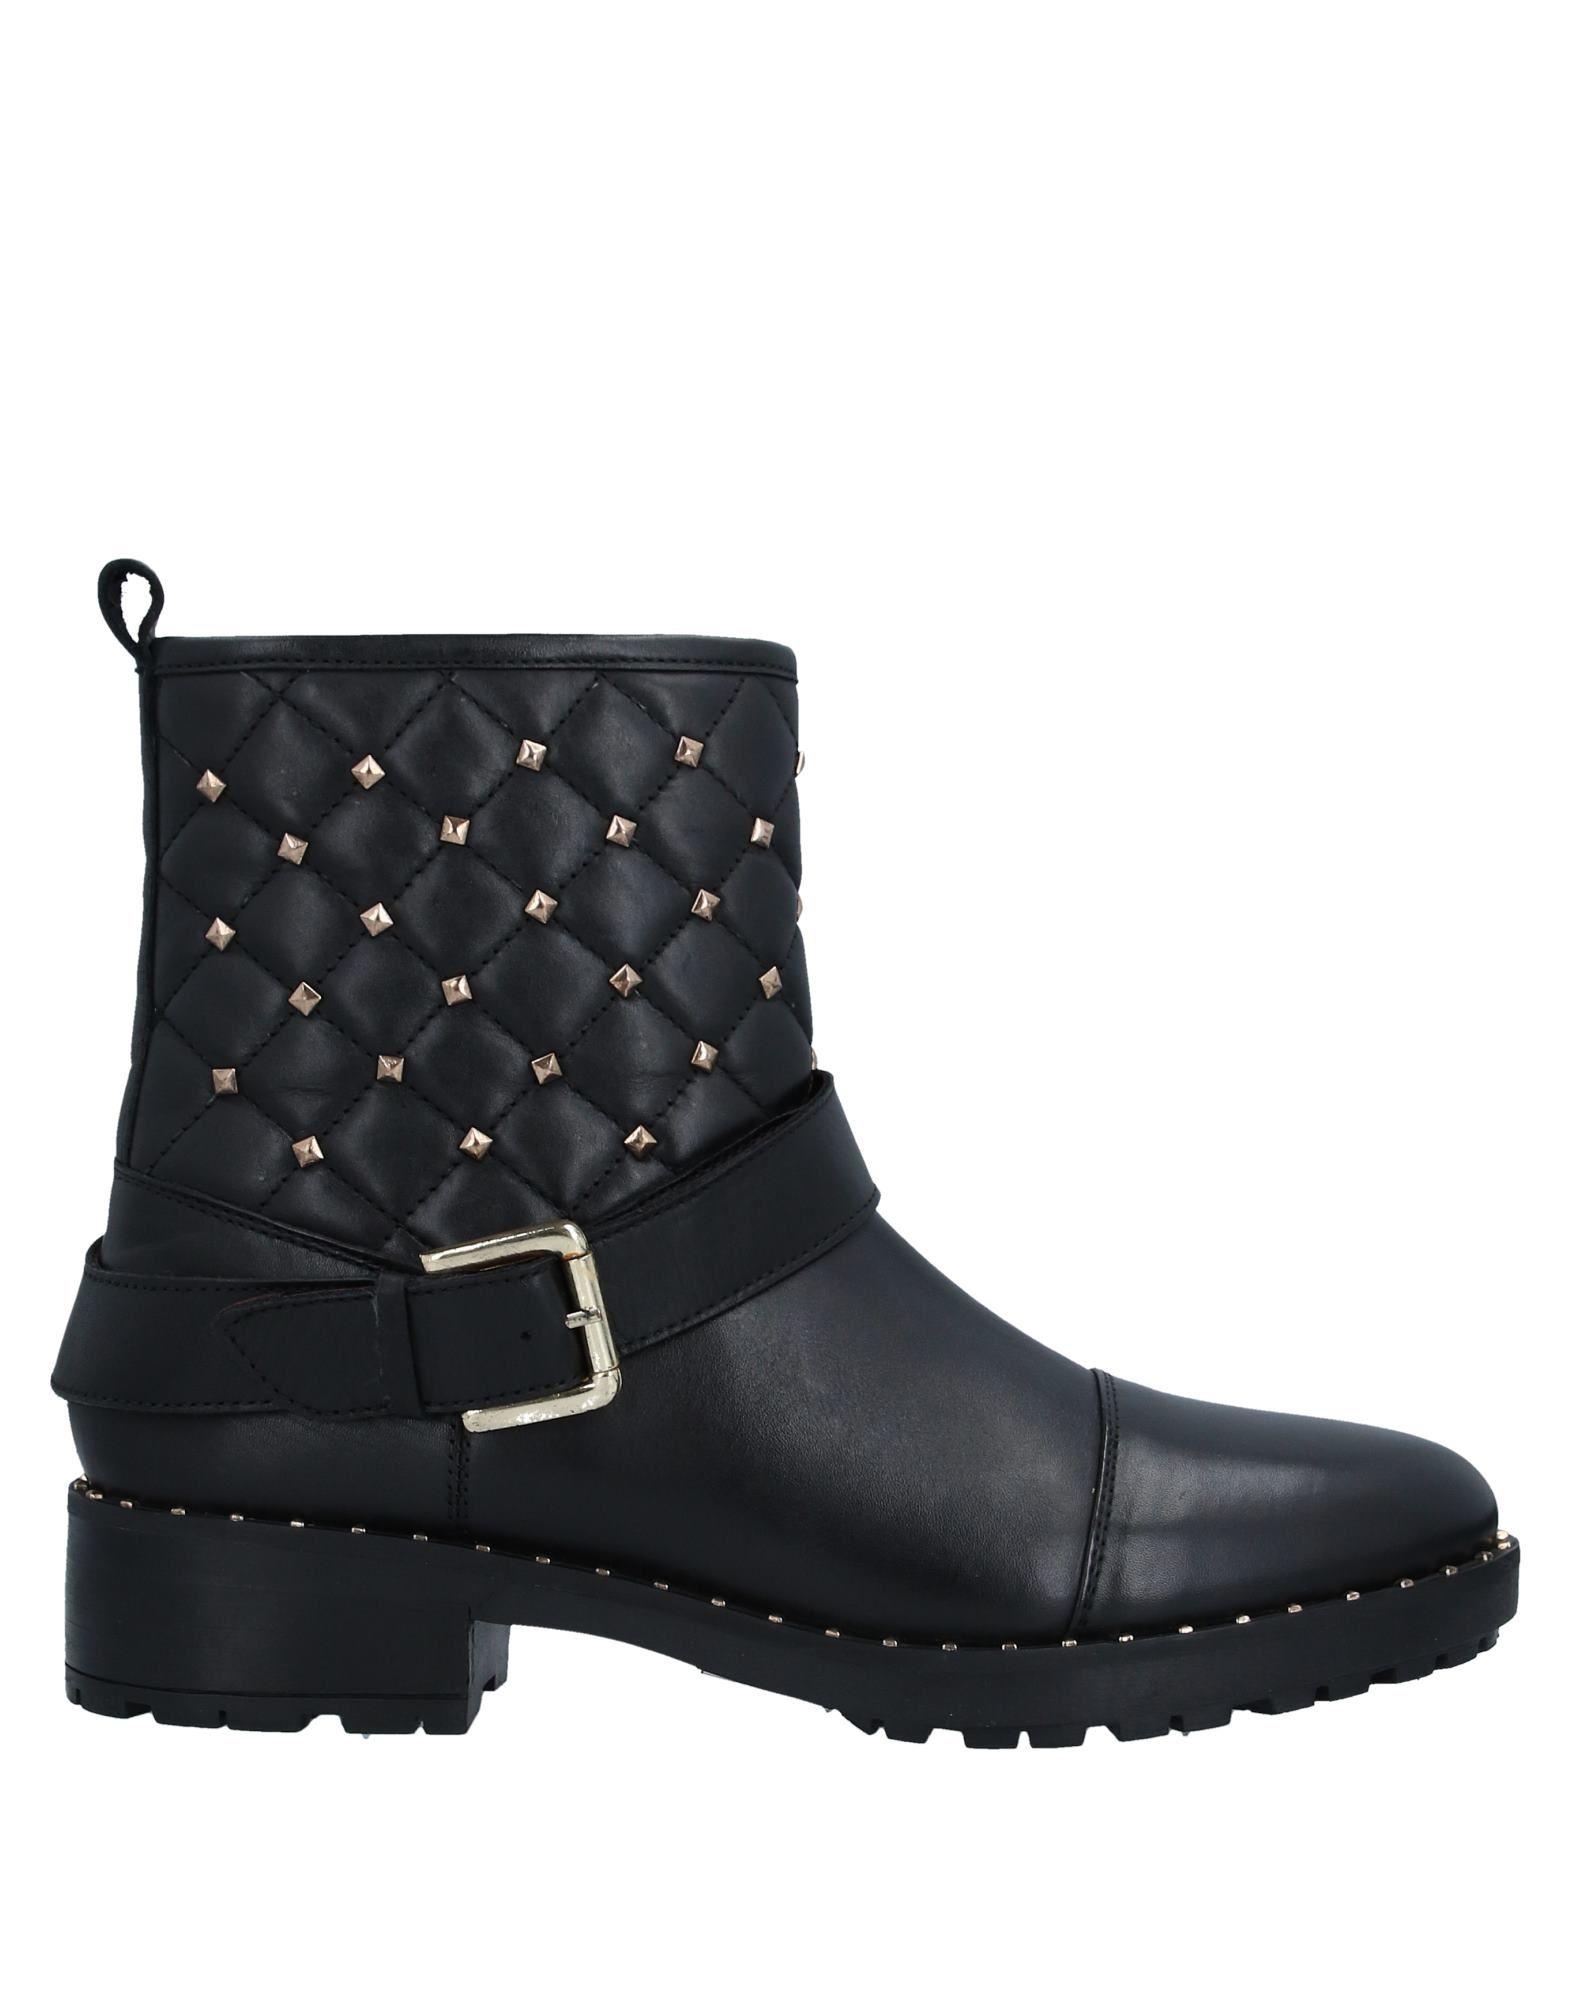 Apepazza Leather Ankle Boots in Black - Lyst